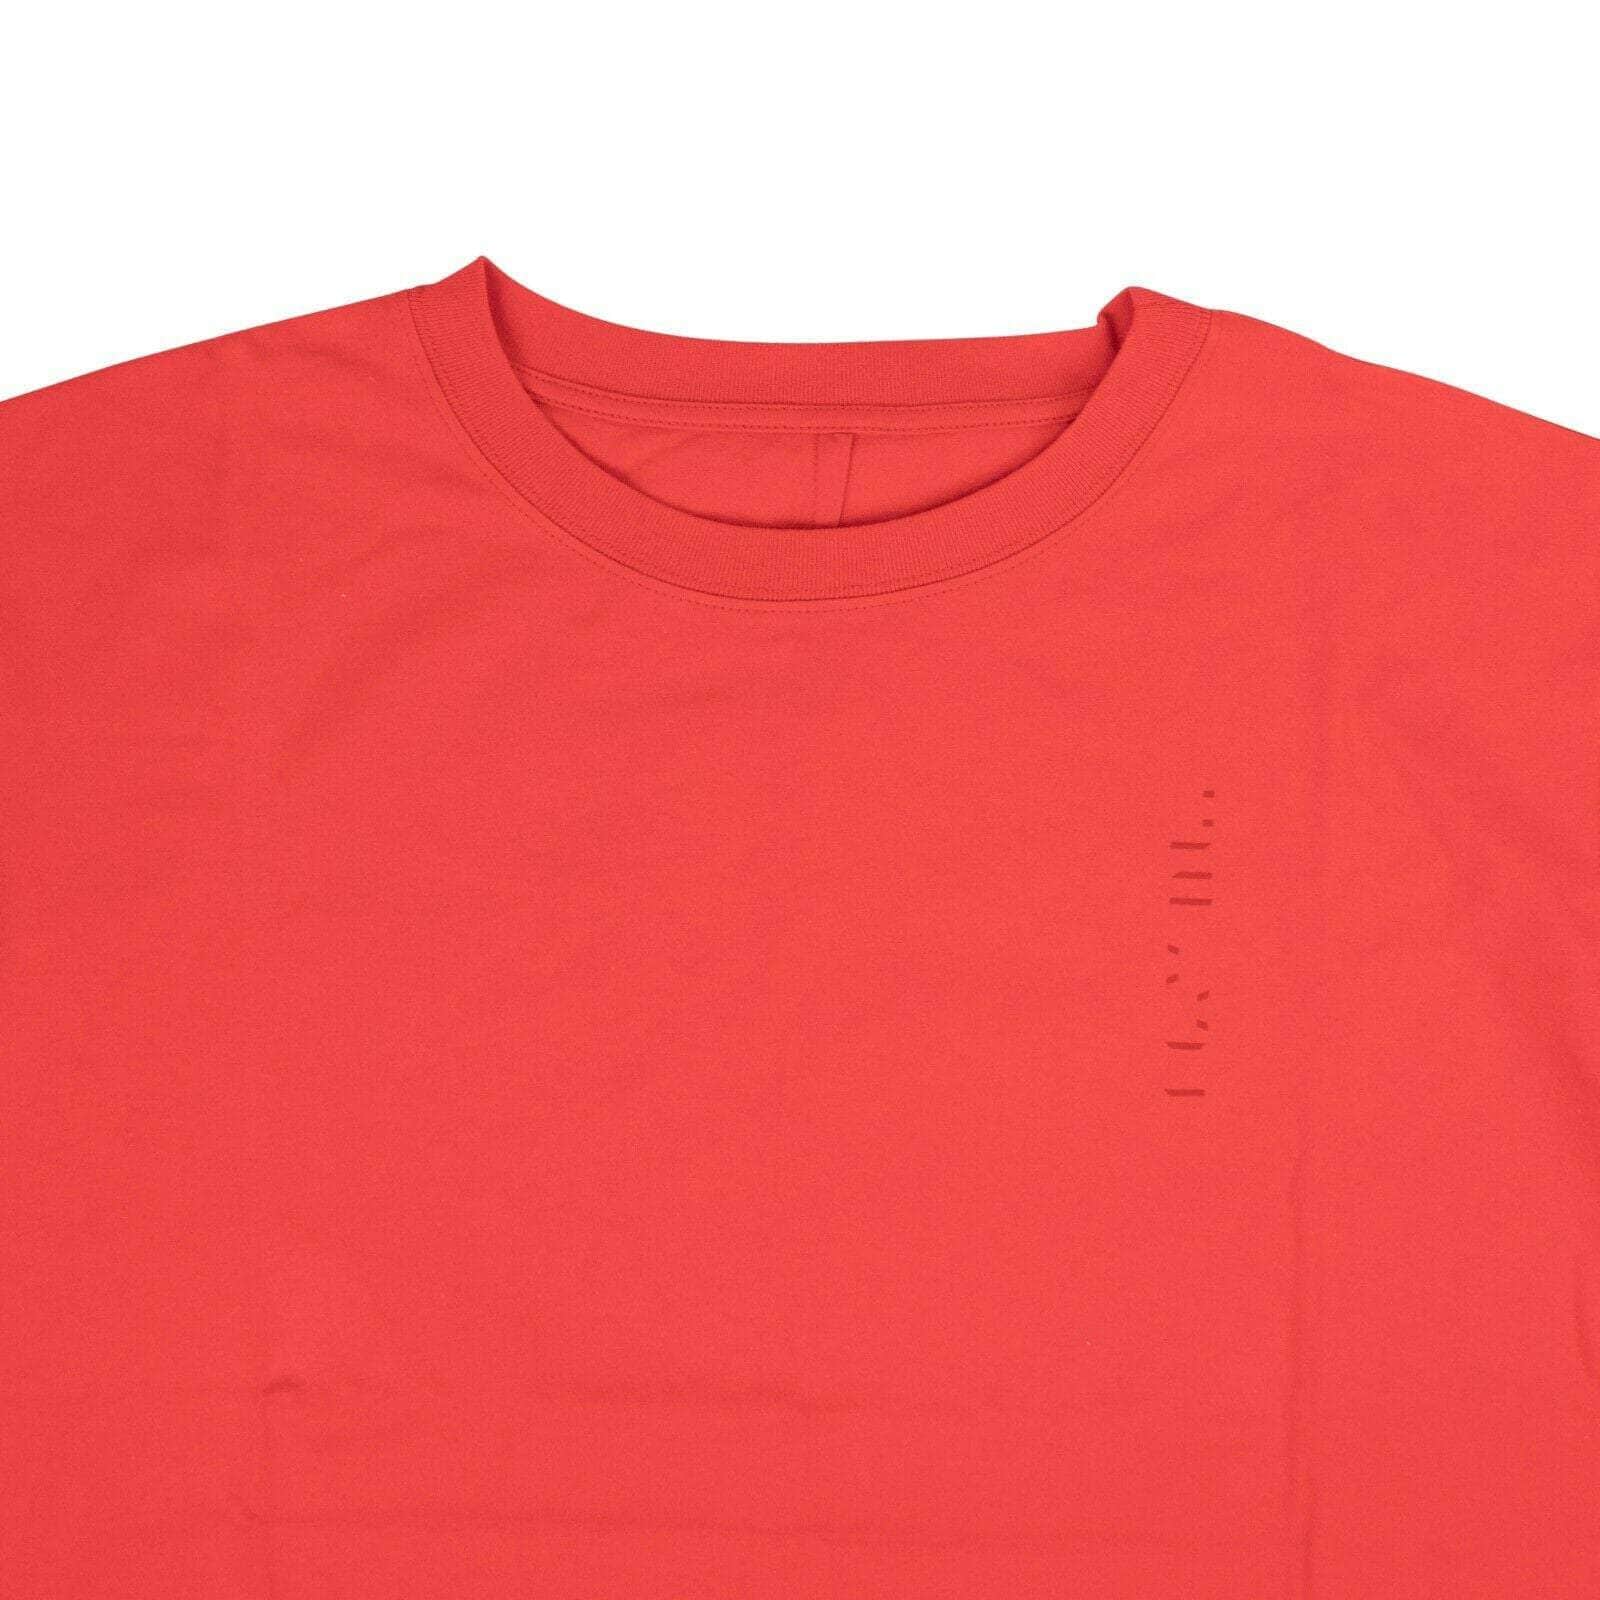 Unravel Project channelenable-all, chicmi, couponcollection, gender-mens, main-clothing S Red Drawstring T-Shirt 74NGG-UN-1004/S 74NGG-UN-1004/S